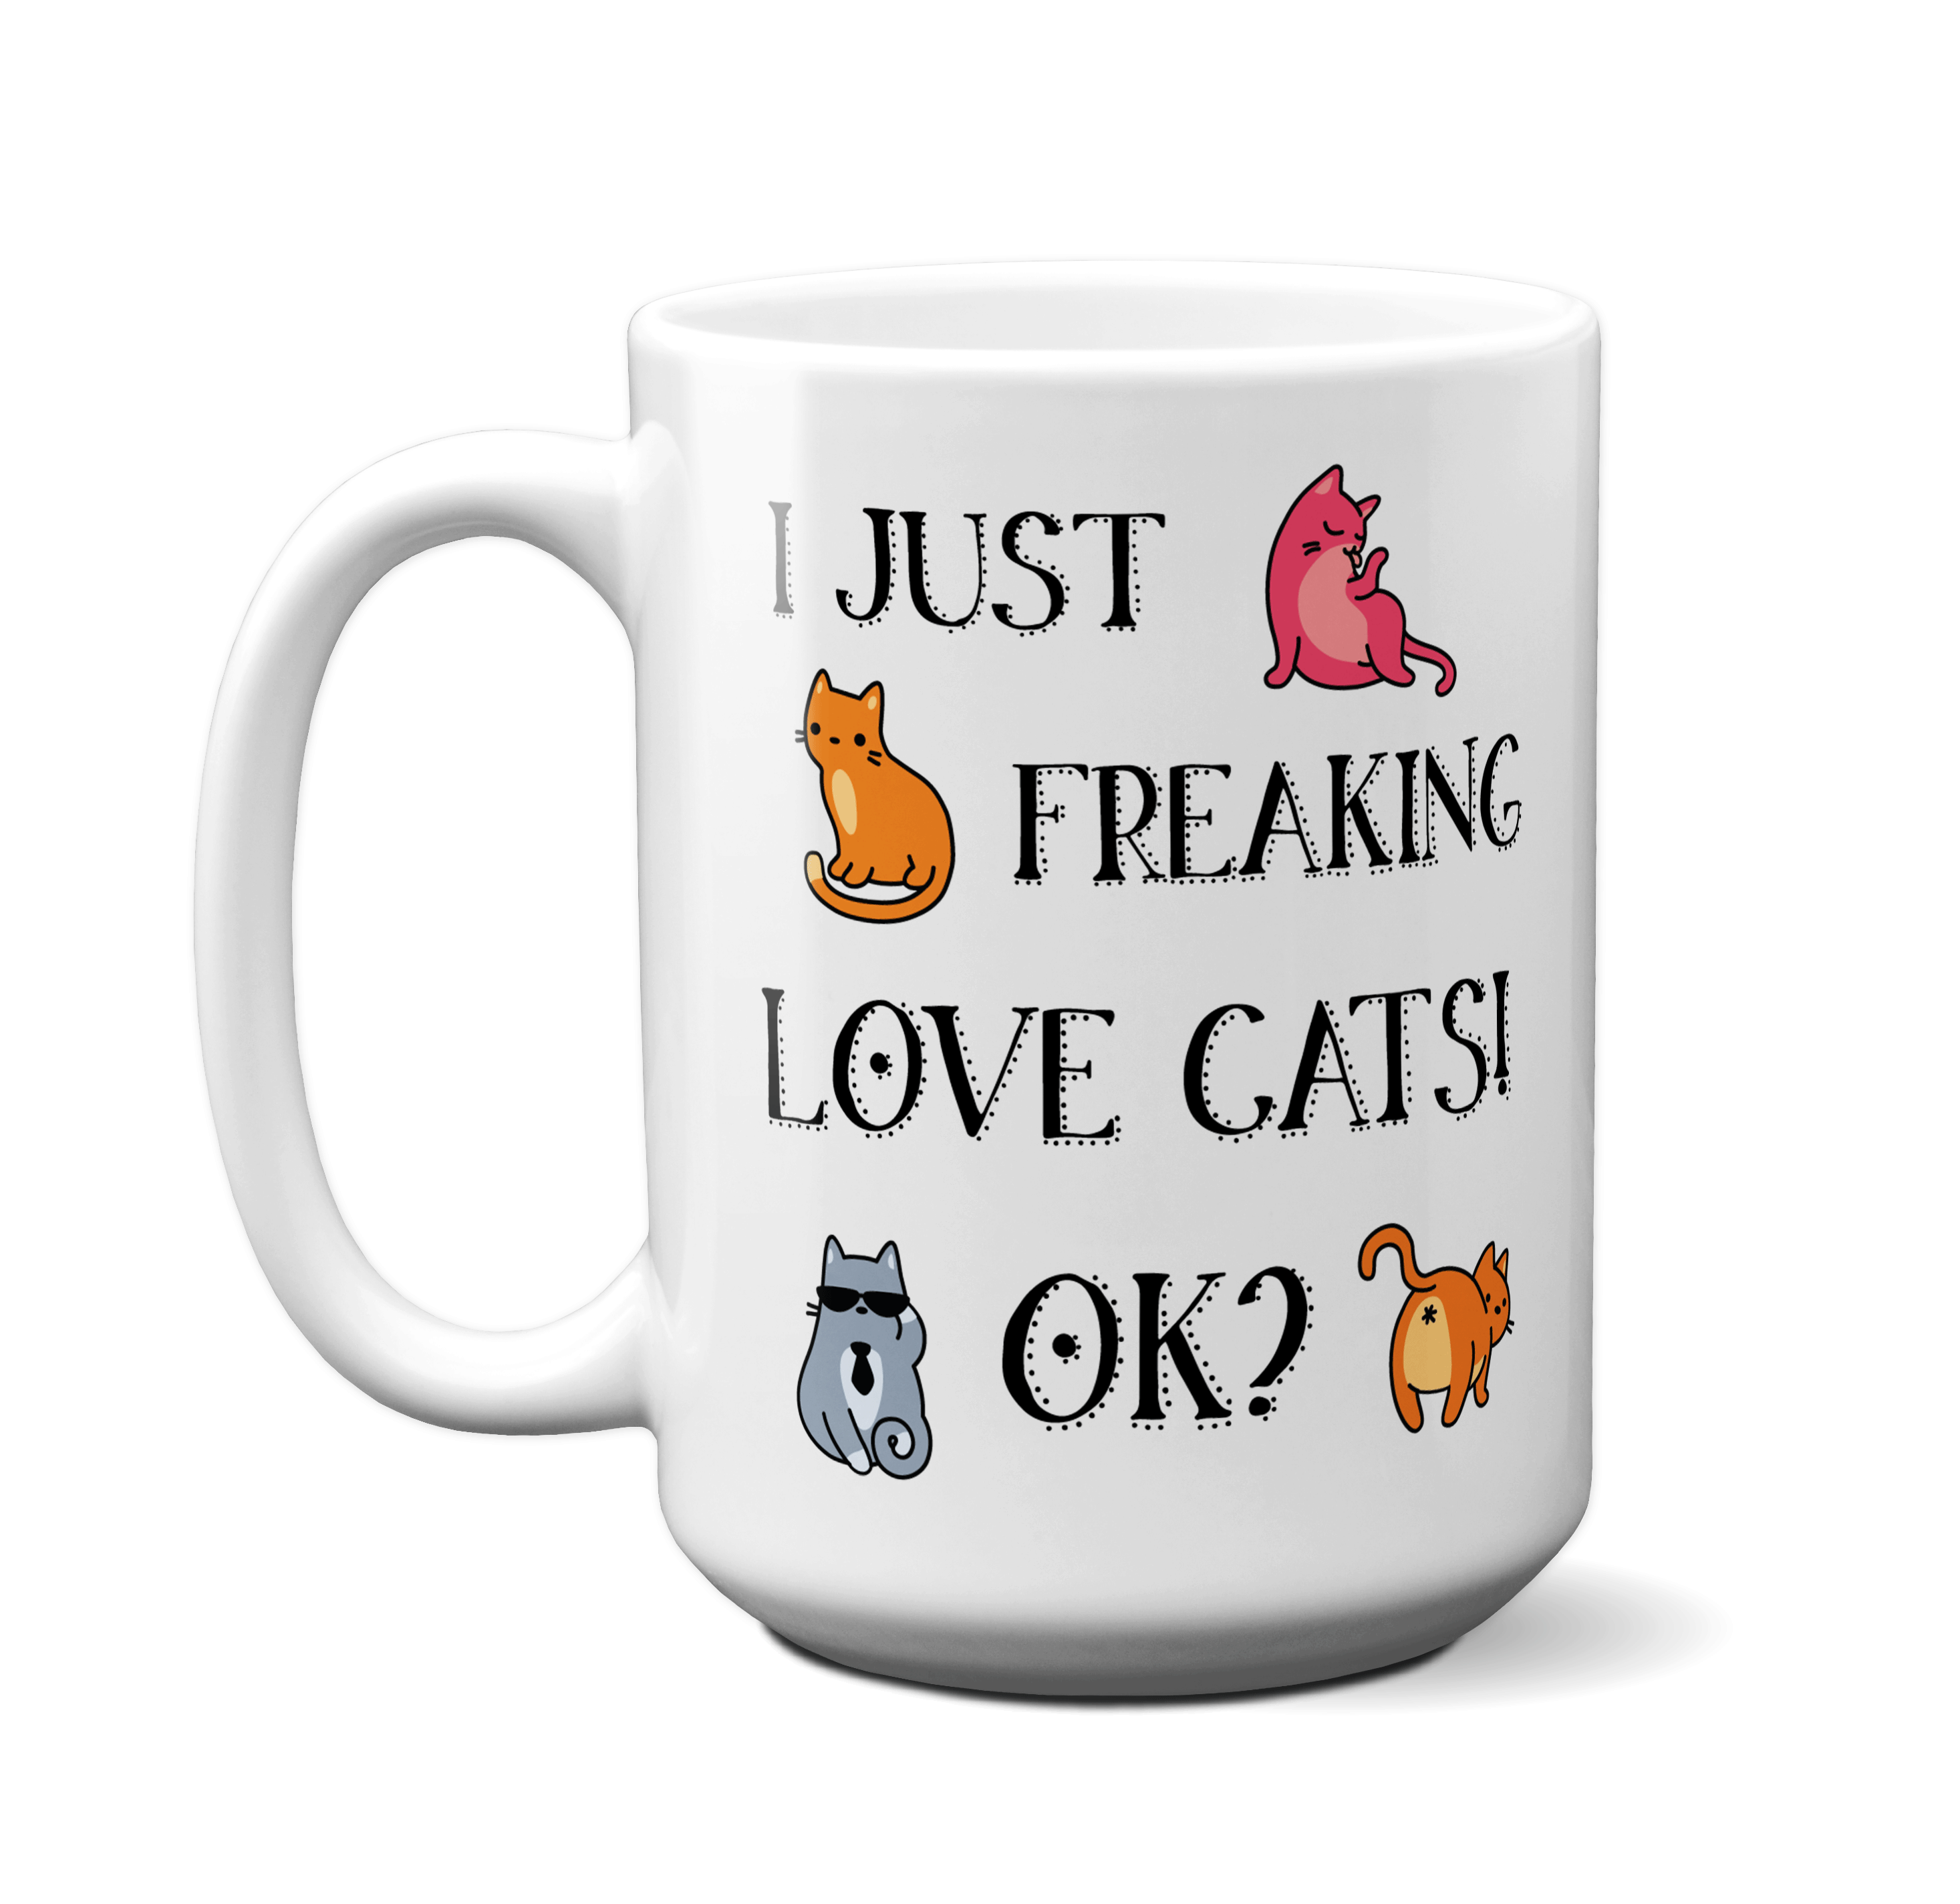 I Just Freaking Love Cats OK Funny Cat Lover Coffee Mug Tea Cup | Crazy Cat Lady Funny Mugs - image 3 of 3